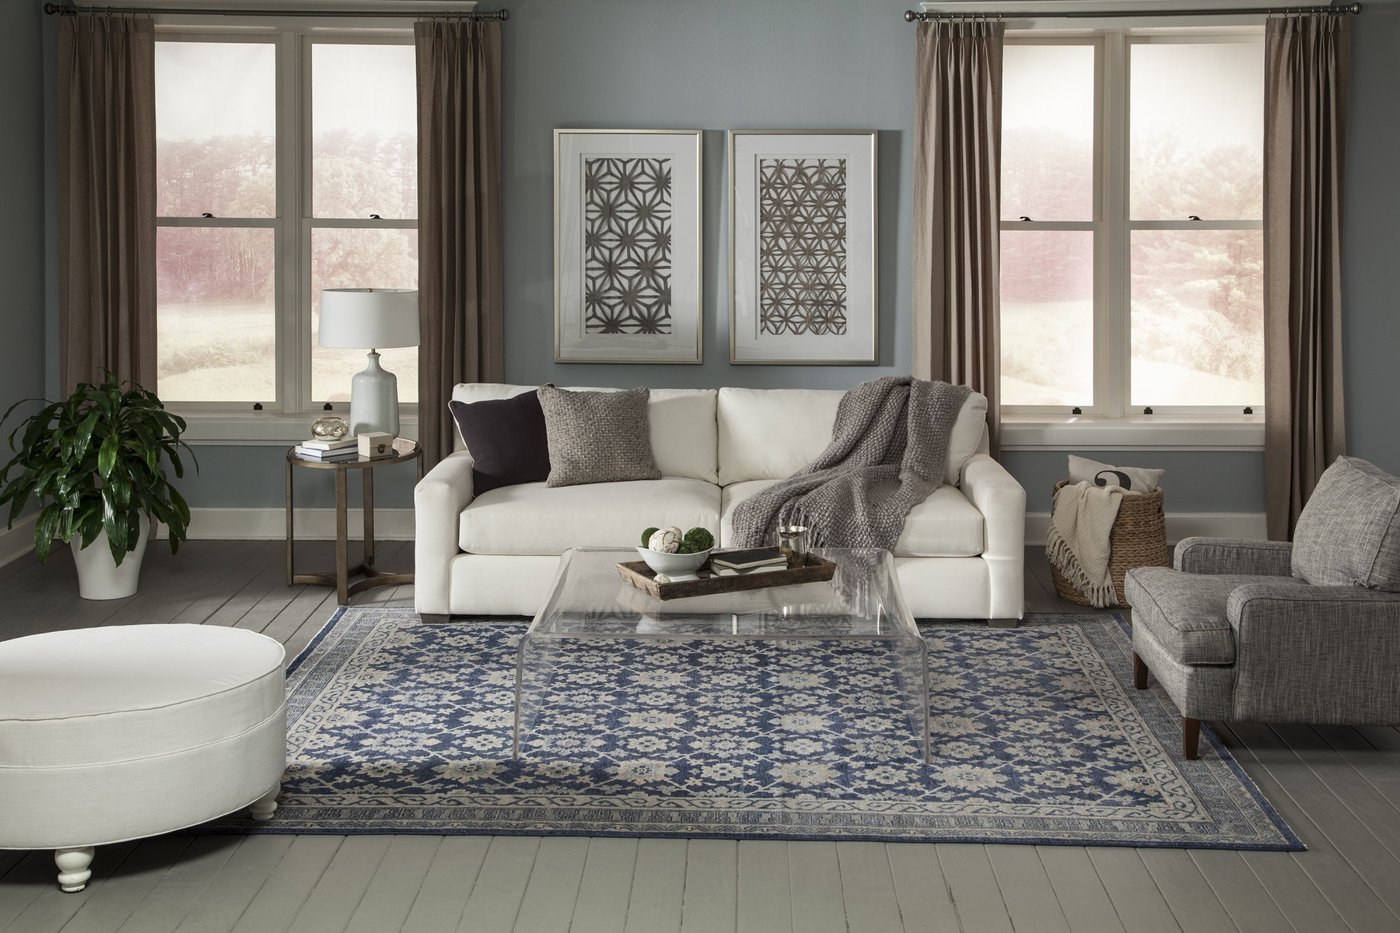 Attractive Patterns - Blue and Grey Living Room Decor Ideas